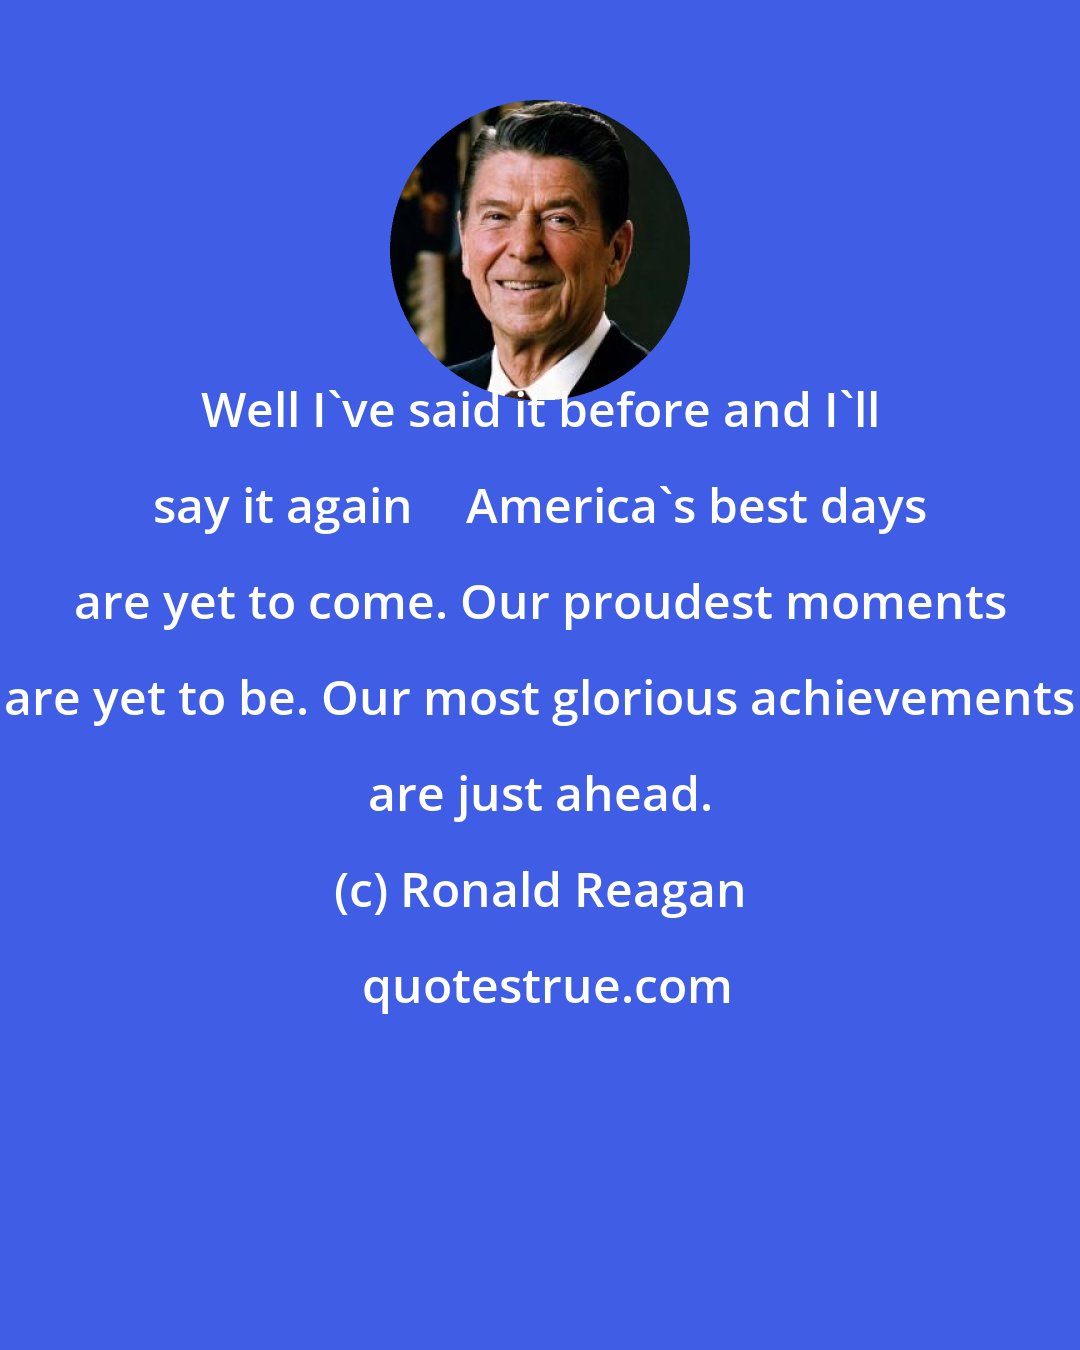 Ronald Reagan: Well I've said it before and I'll say it again  America's best days are yet to come. Our proudest moments are yet to be. Our most glorious achievements are just ahead.